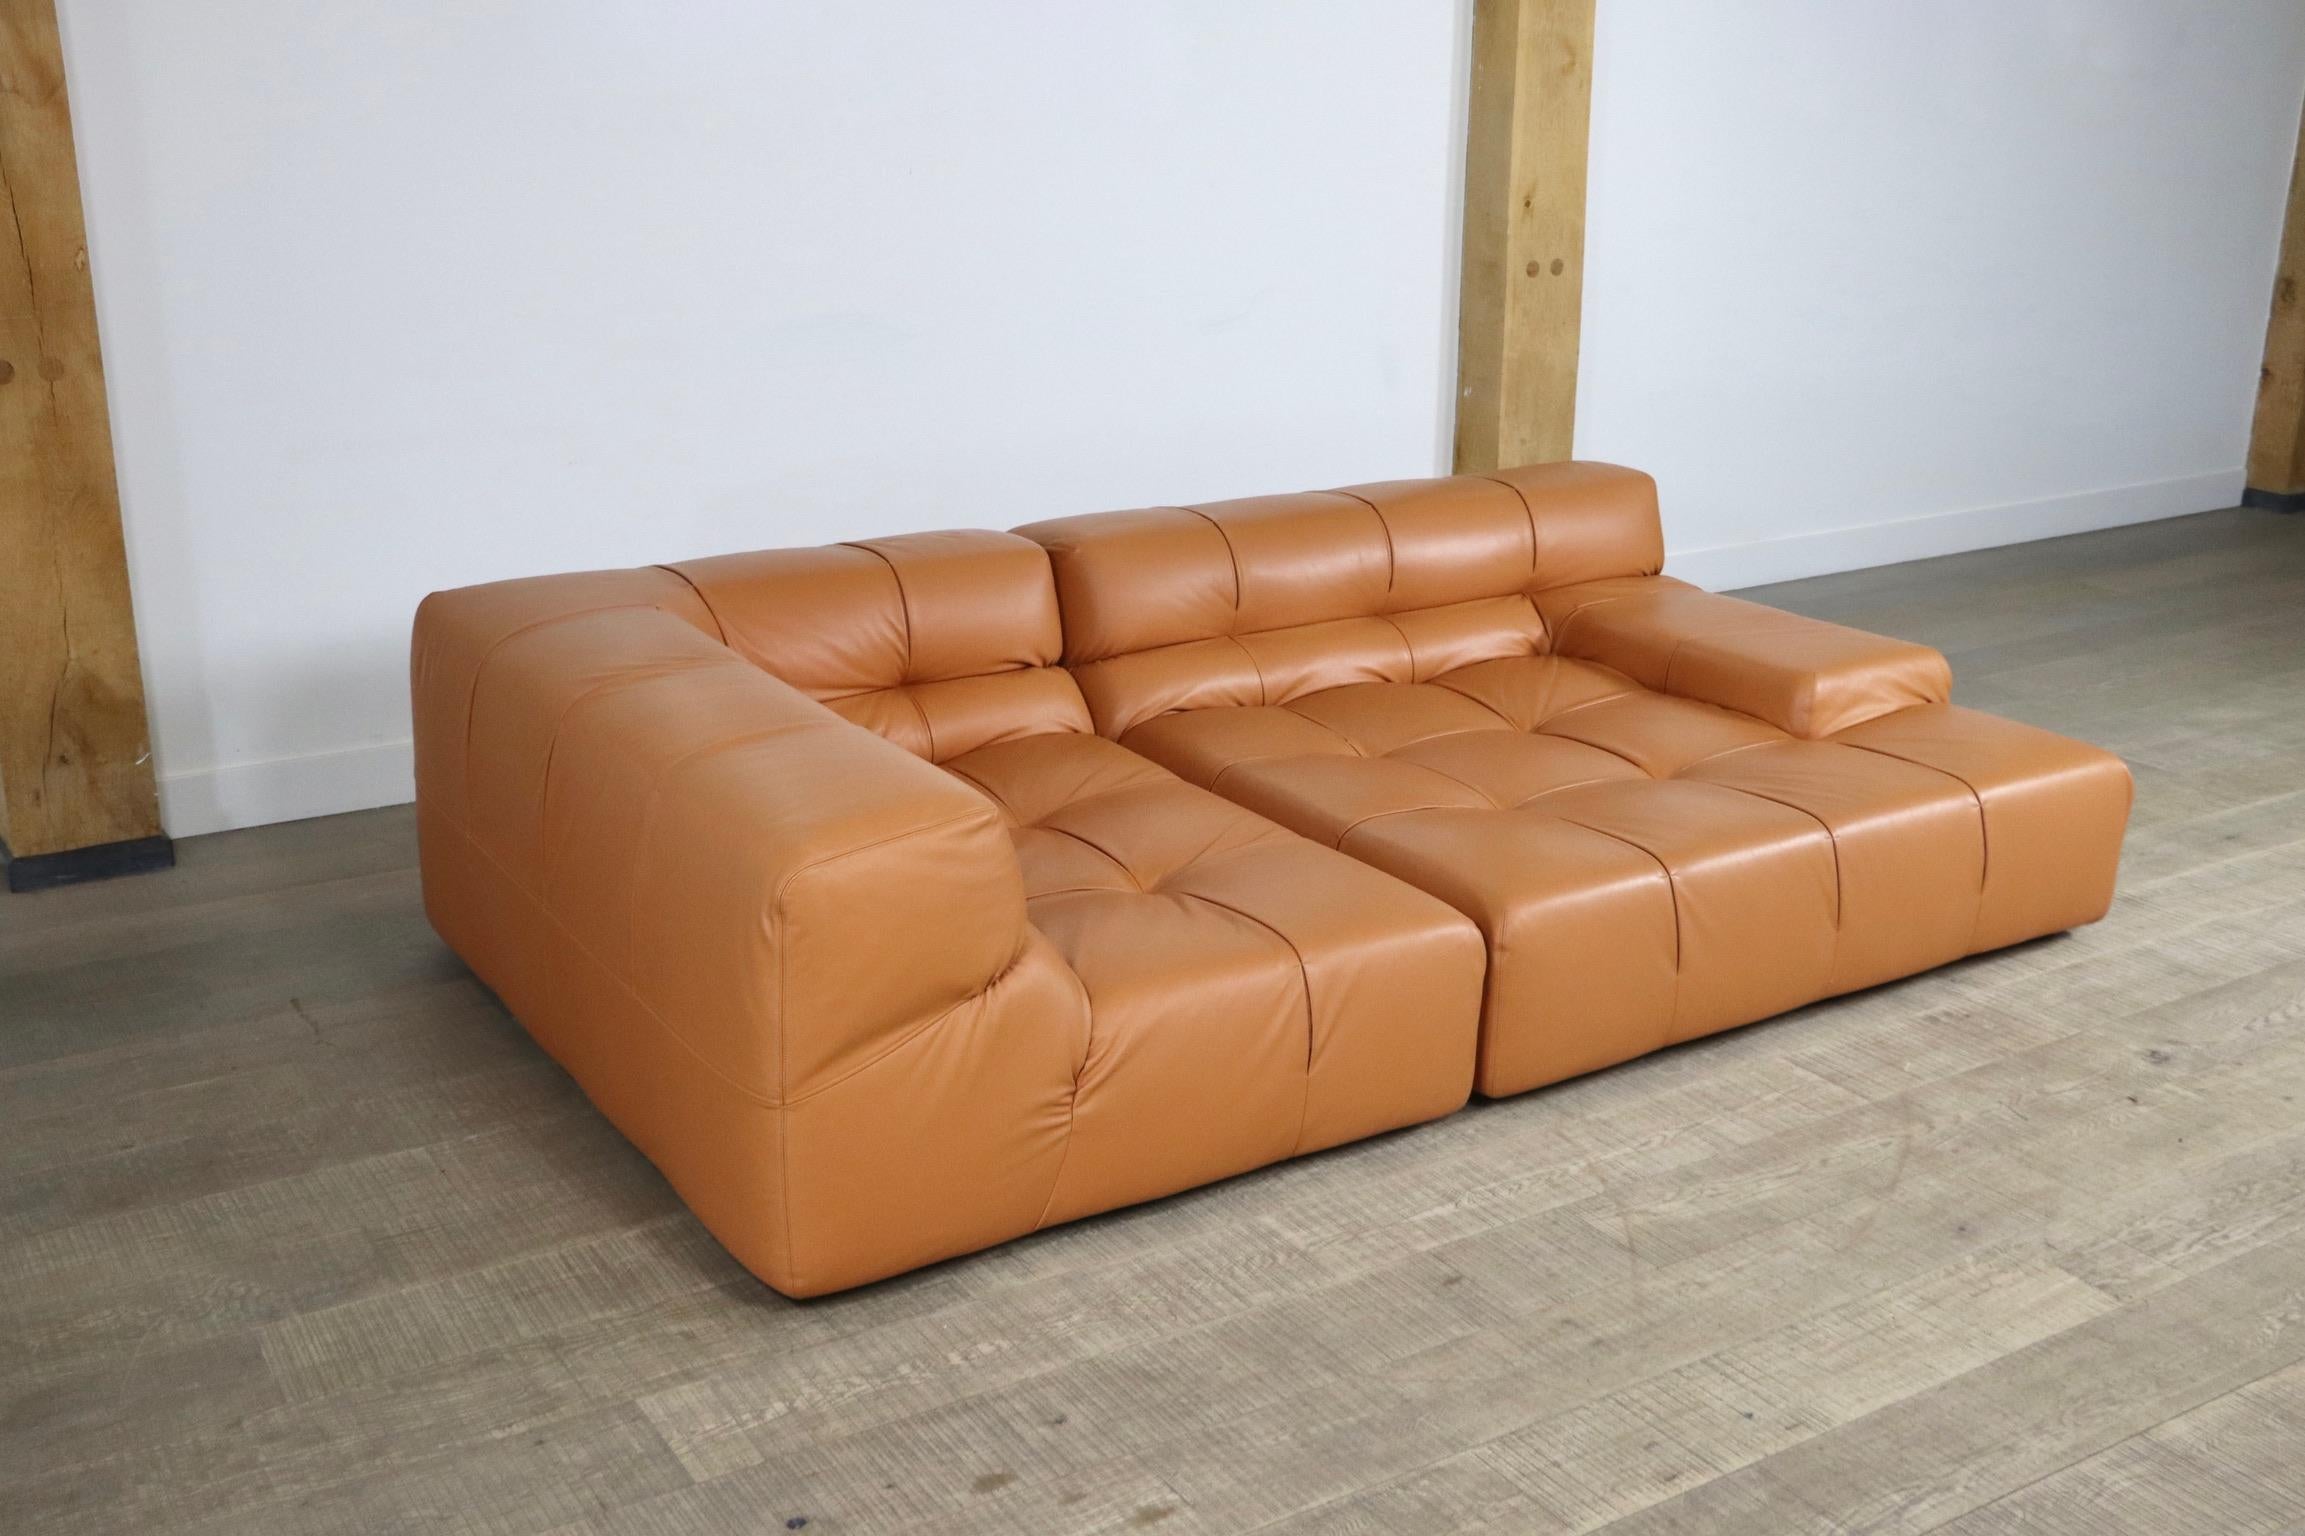 Beautiful cognac leather Tufty-Time sofa by Patricia Urquiola for B&B Italia. The sofa consists of two elements: One smaller element, and a large lounge element with an armrest. Create your ideal lounge or movie room with this amazing sofa!